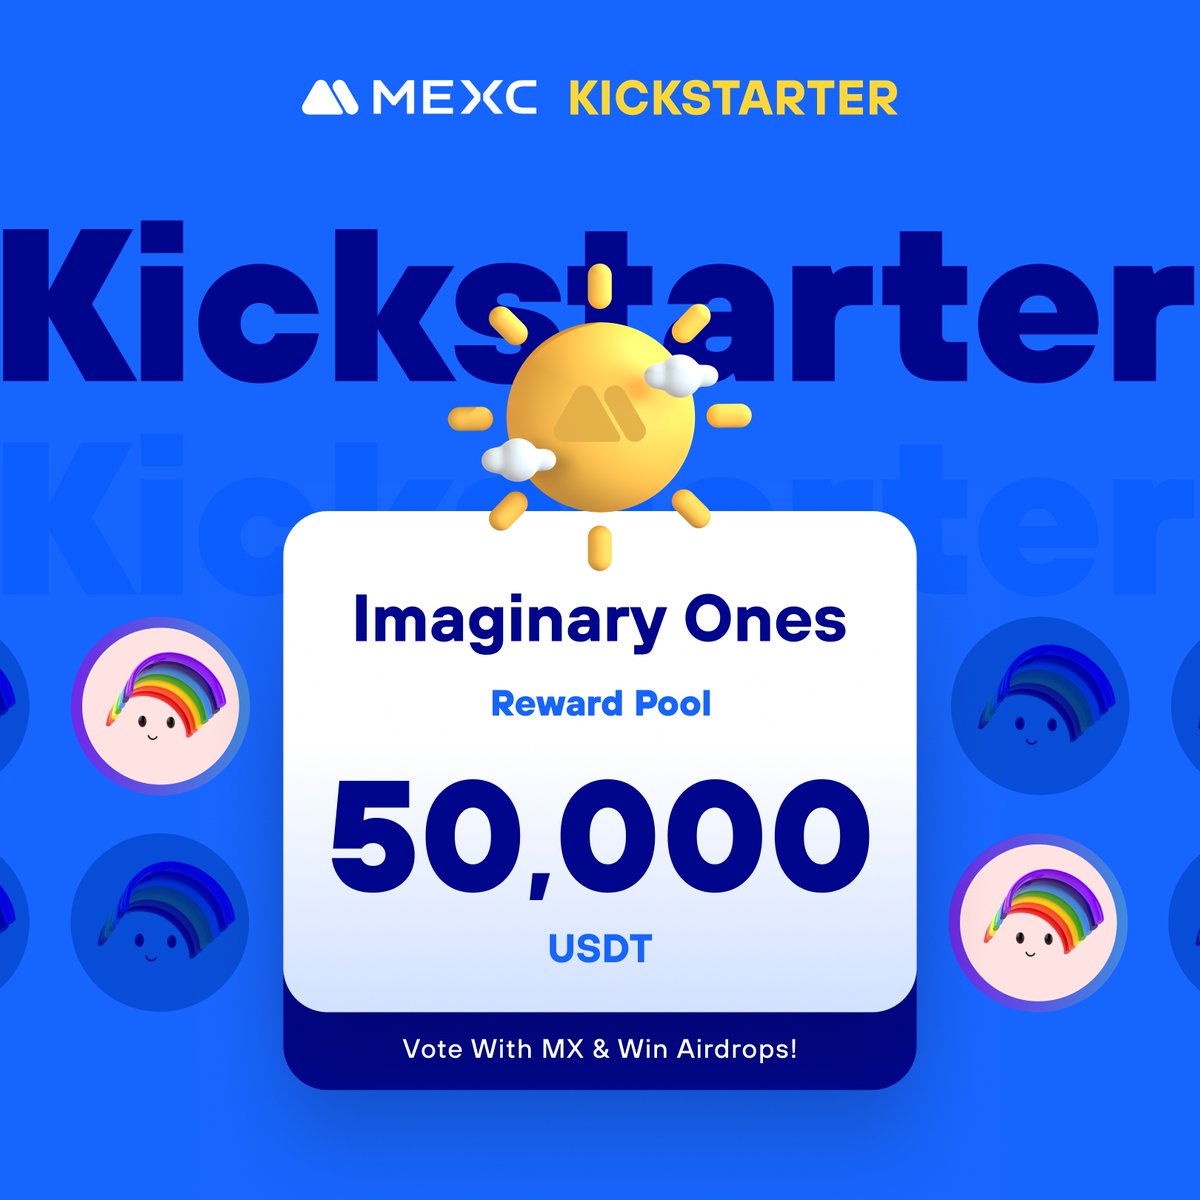 .@Imaginary_Ones, a project that aims to spark imagination without limits and uses Web3 technology to blend gaming, merchandise, and entertaining content, creating the Imaginary World, is coming to #MEXCKickstarter 🚀 

🗳Vote with $MX to share massive airdrops
📈 $BUBBLE/USDT